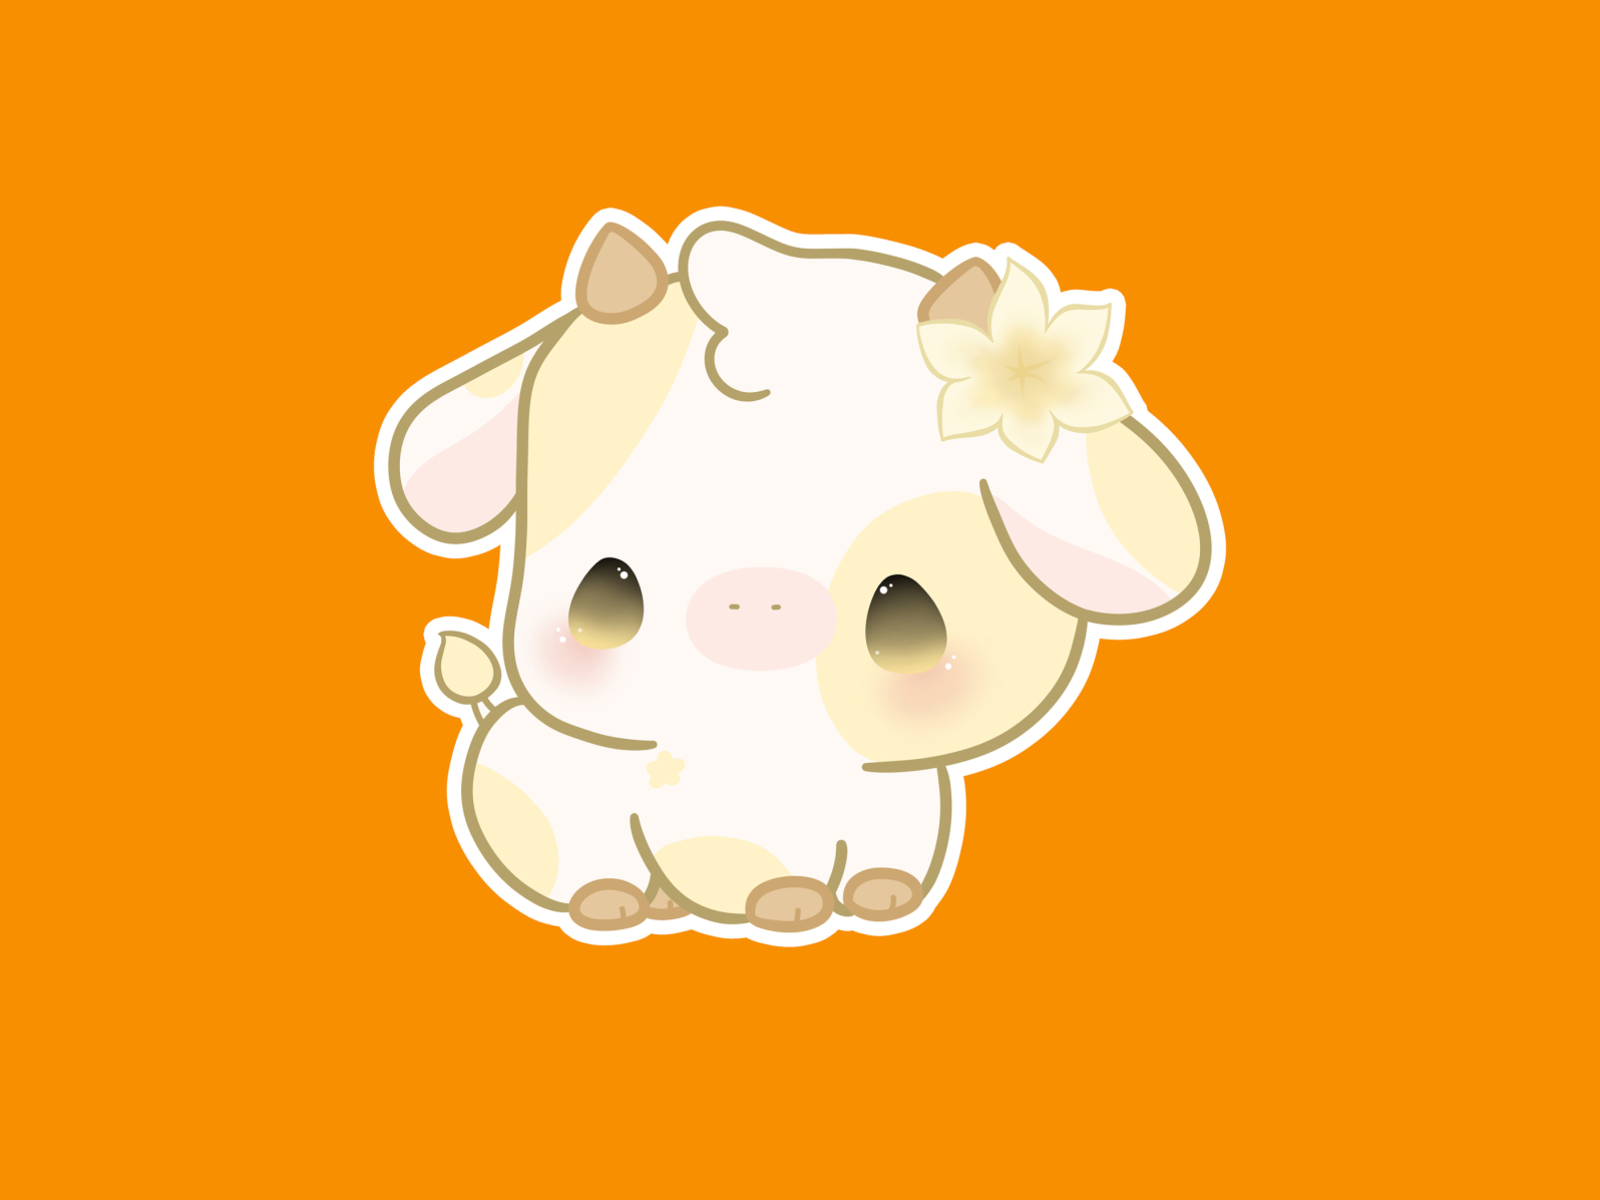 HOW TO DRAW A COW KAWAII EASY - YouTube